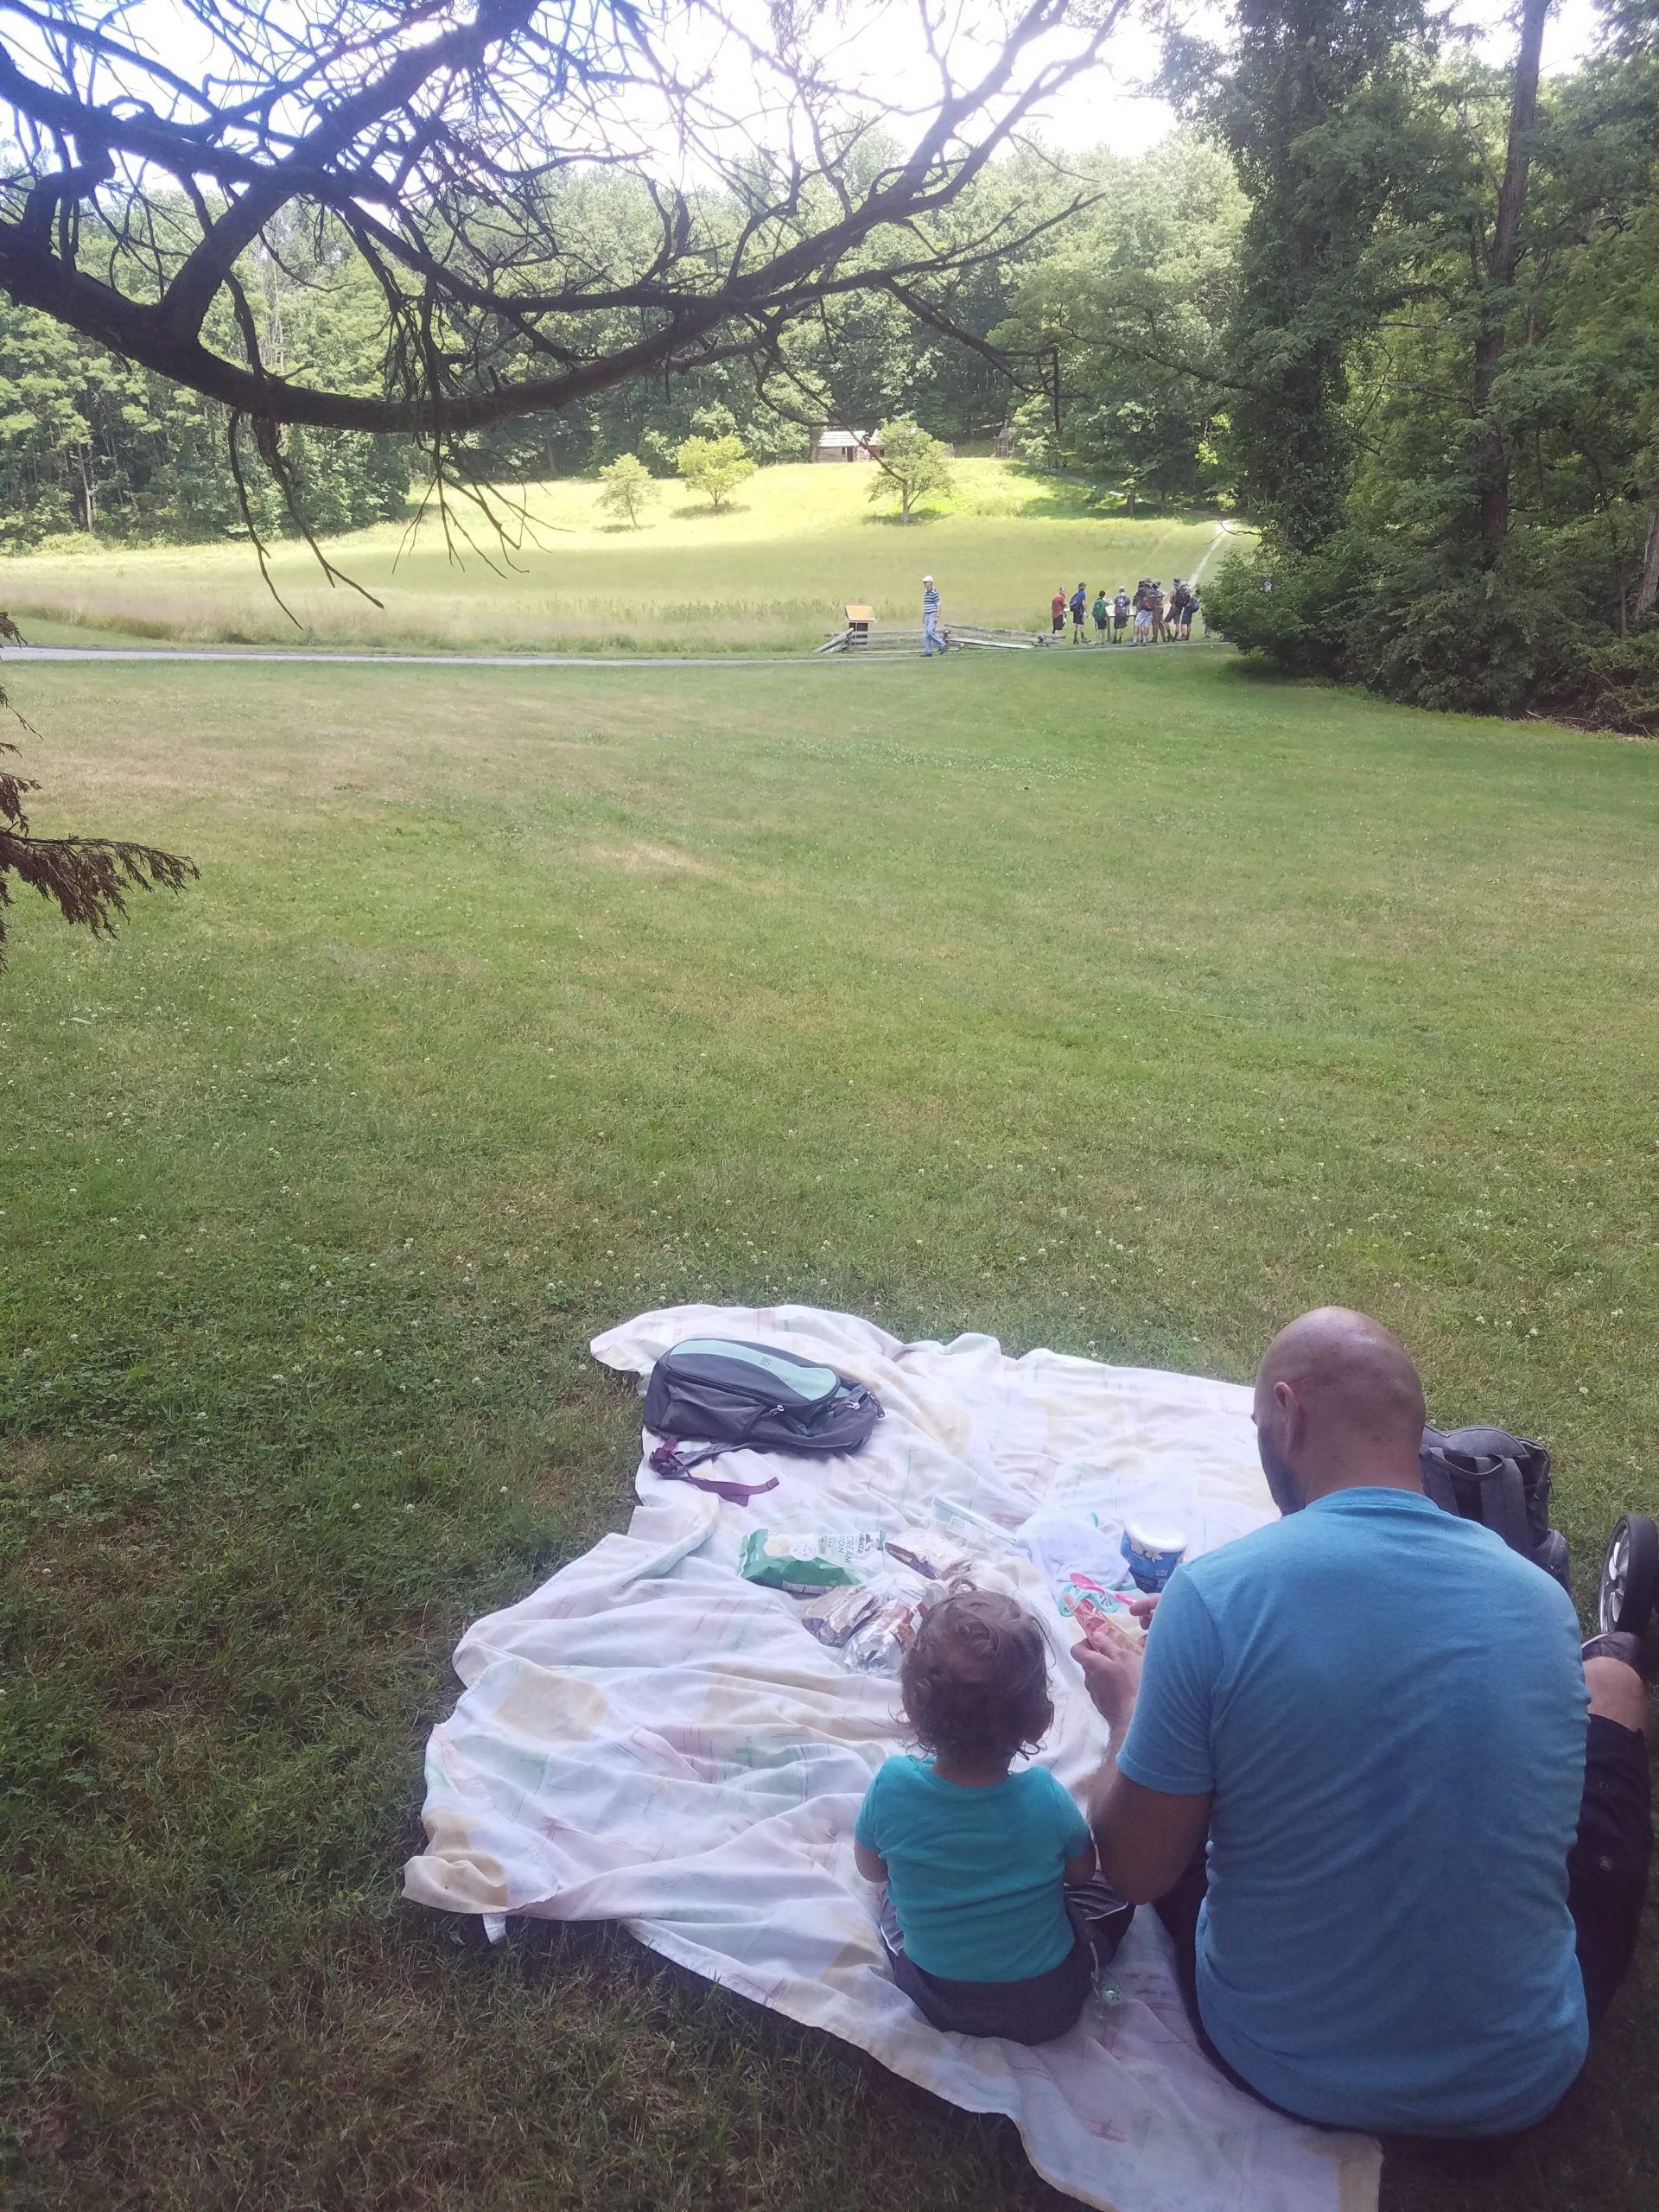 A man and child sit on the grass overlooking Jockey Hollow Park